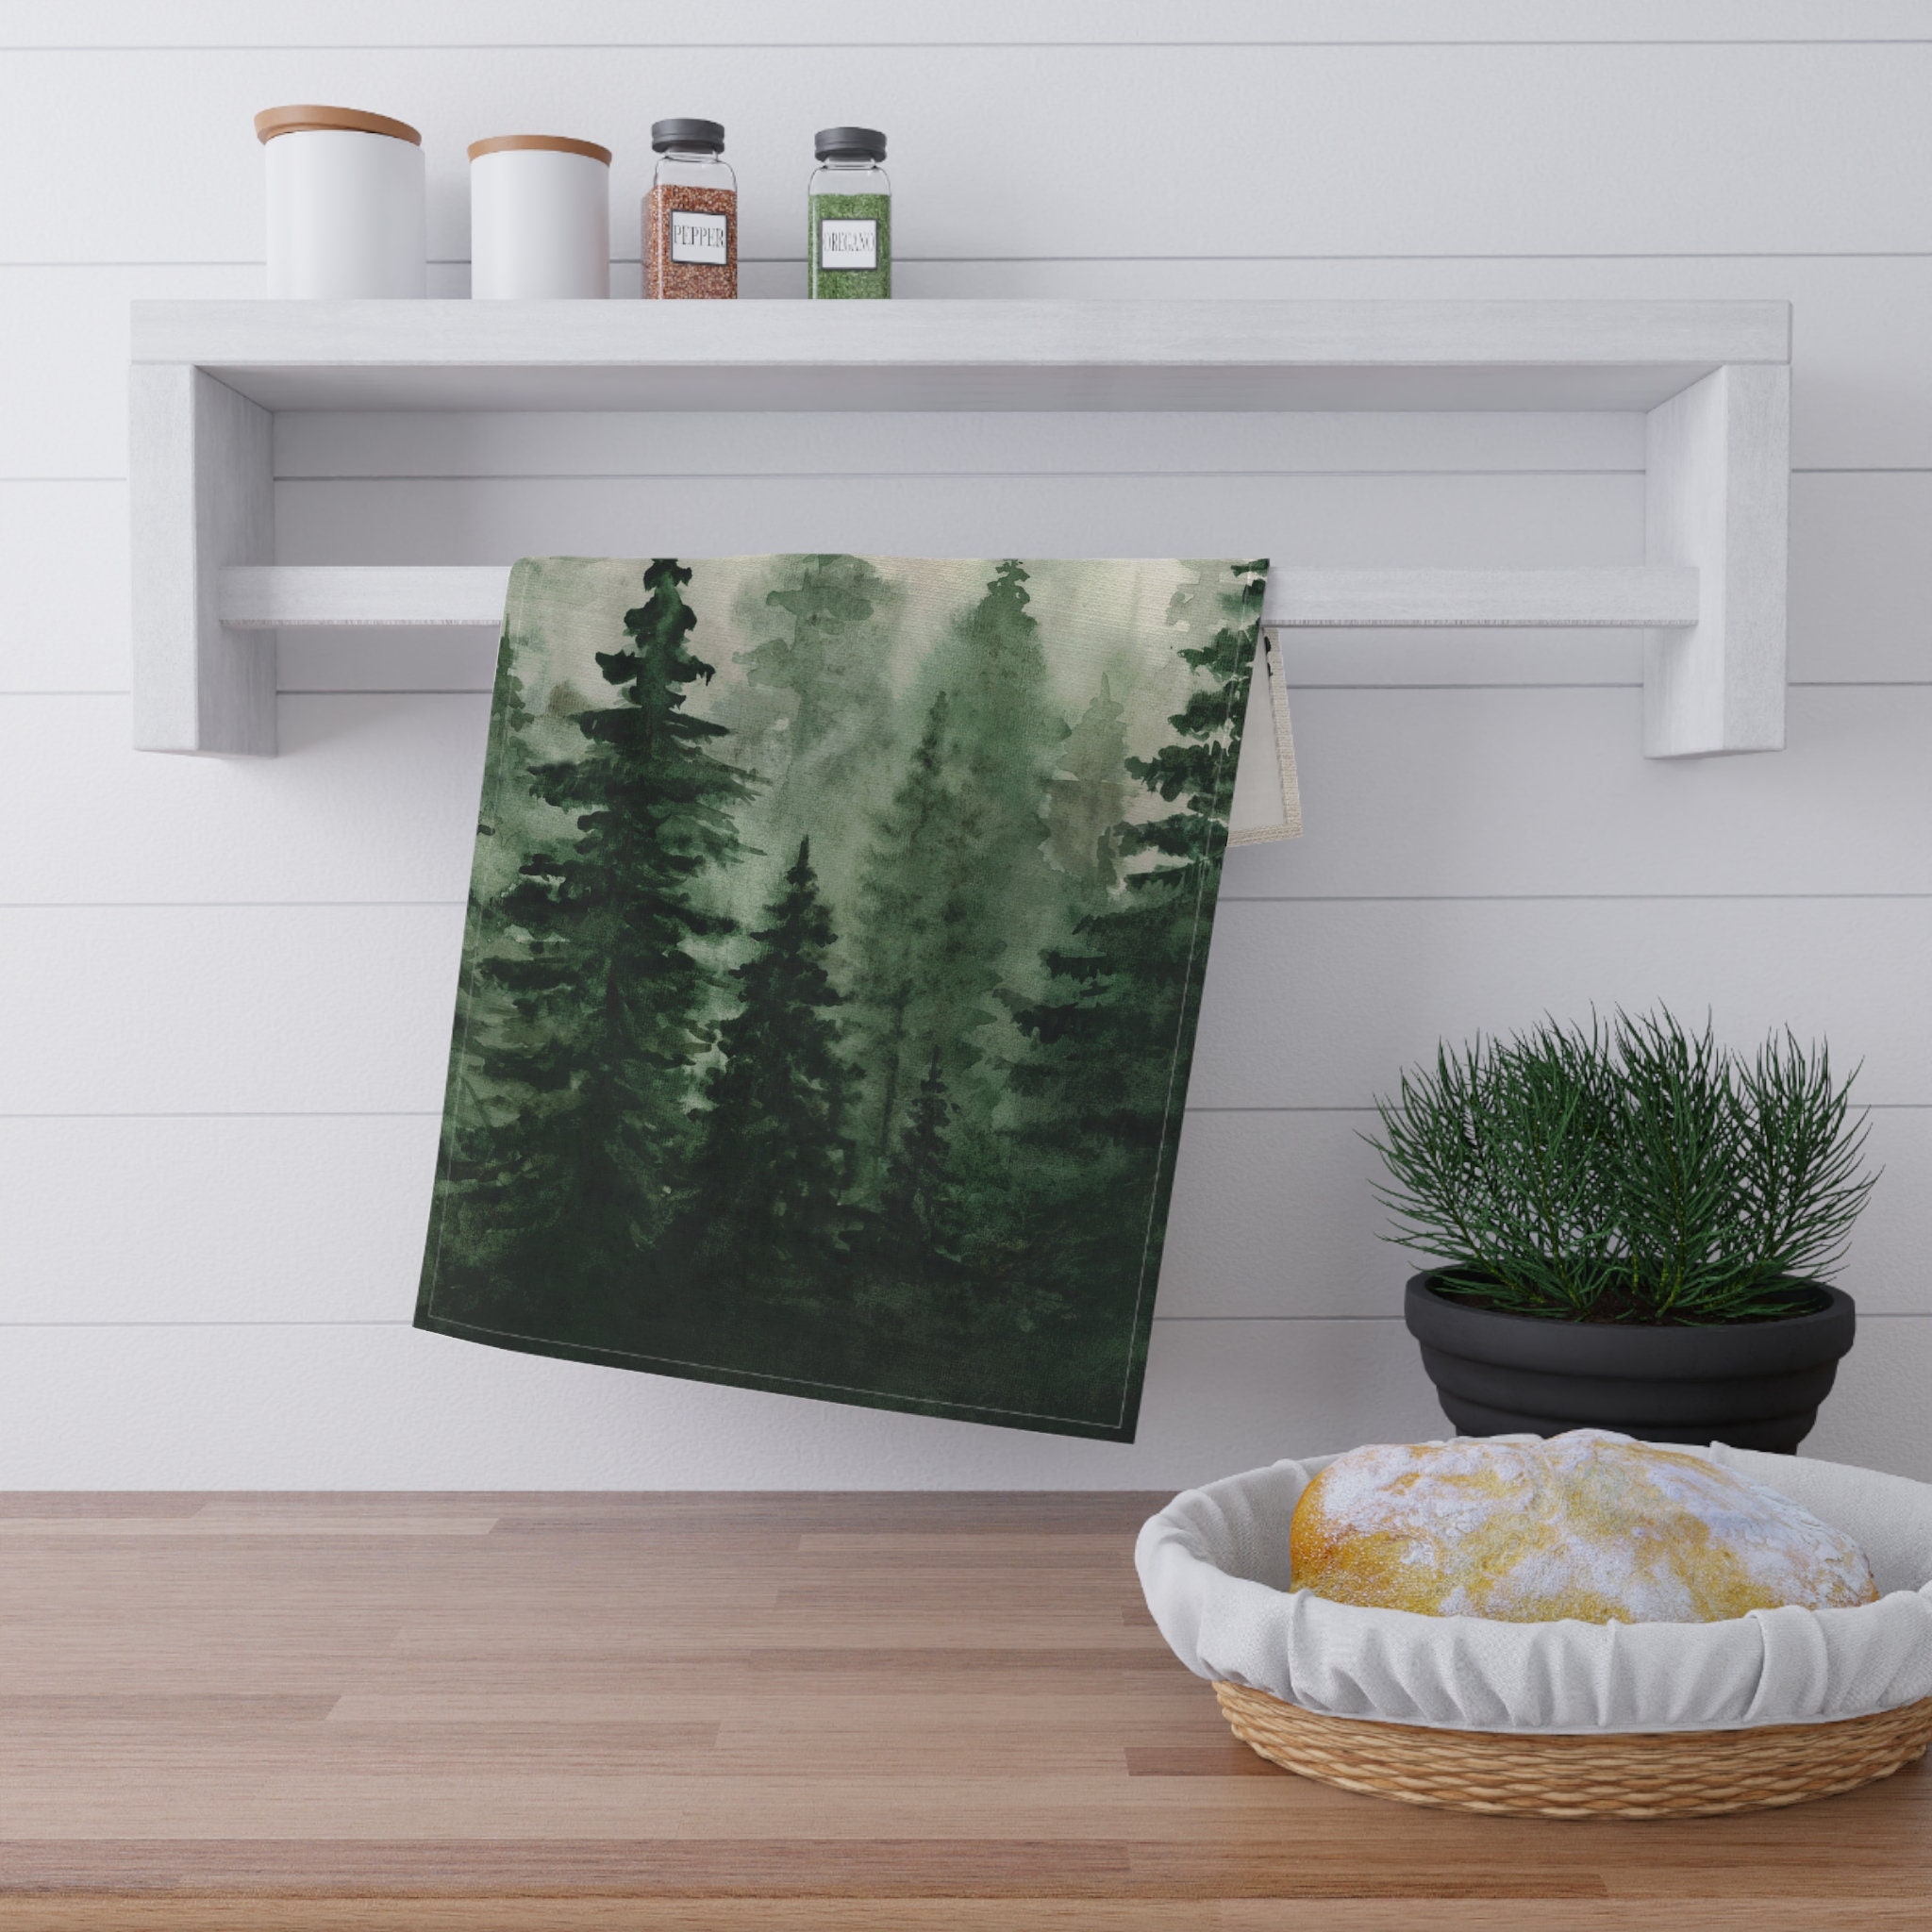 Cabin Lodge Themed Kitchen Towels Set